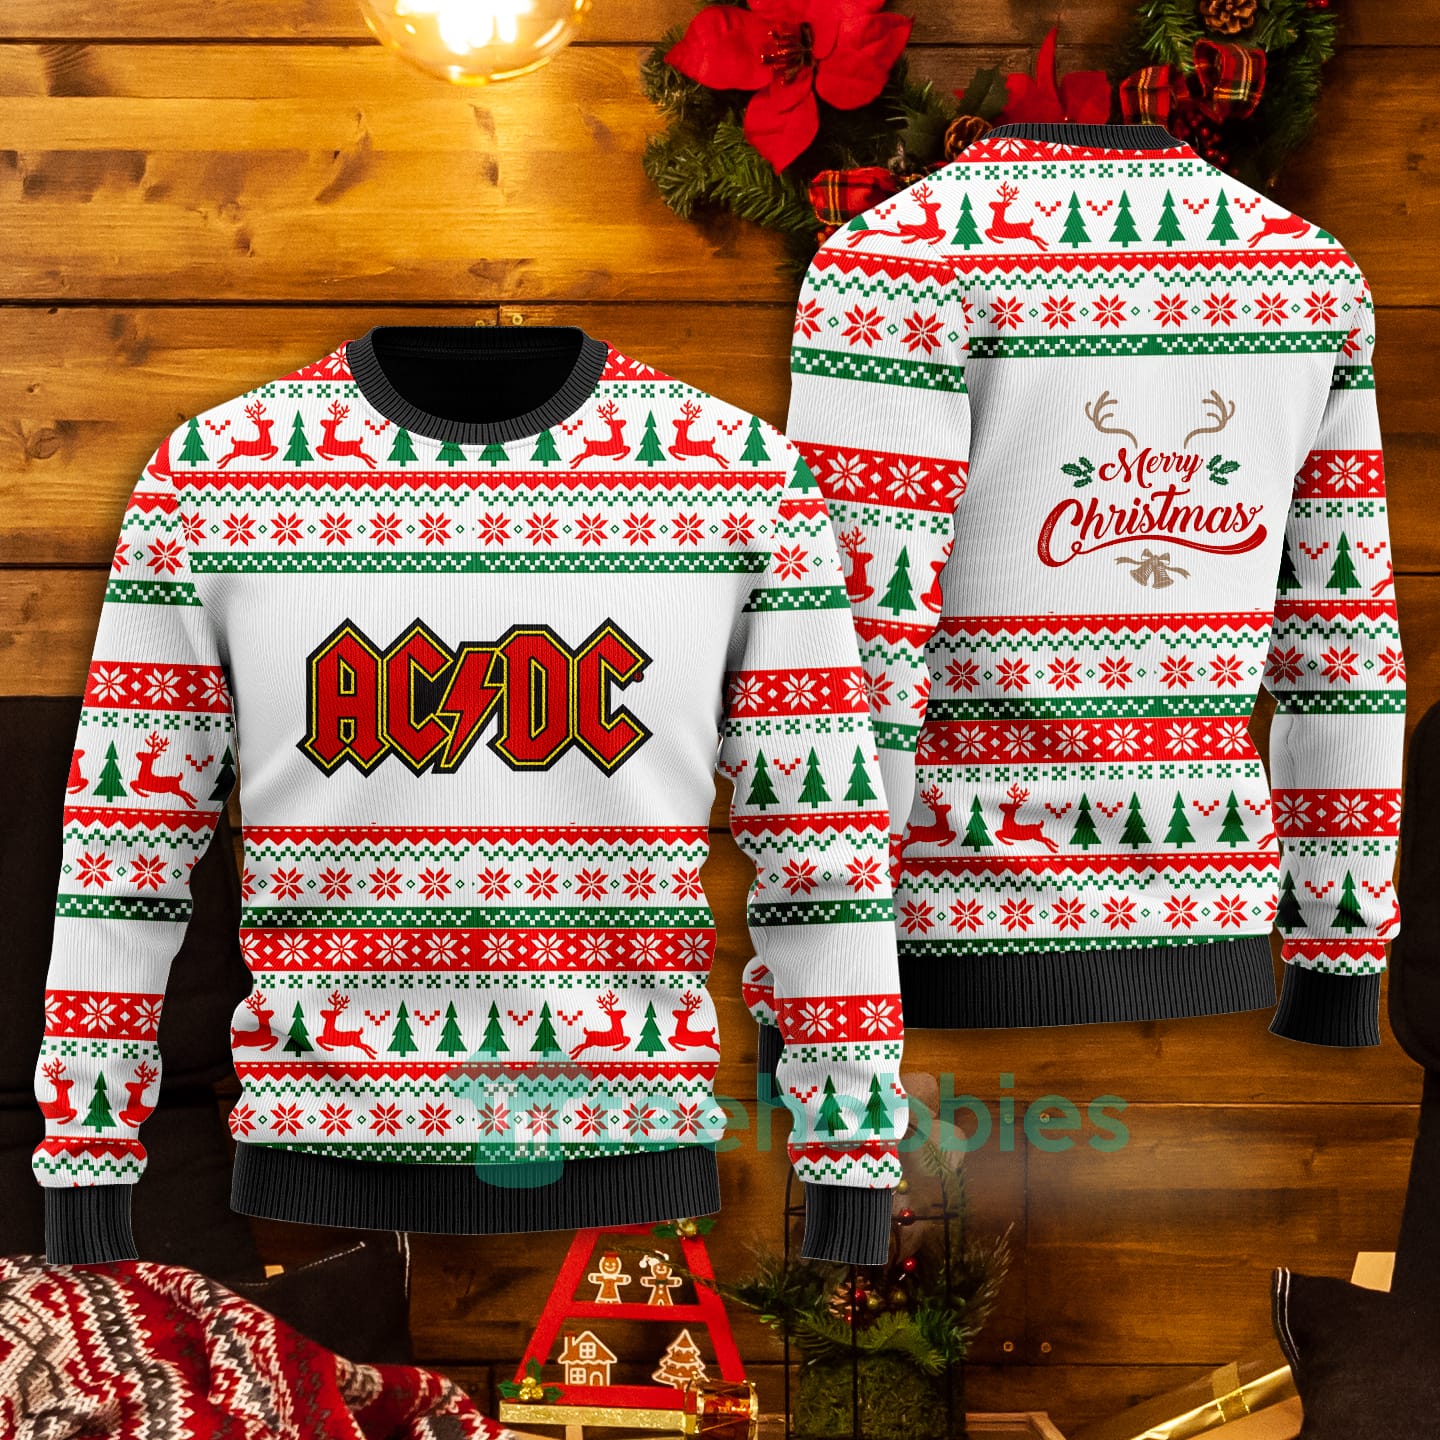 Over Christmas Sweater Christmas AcDc White All Printed Mery